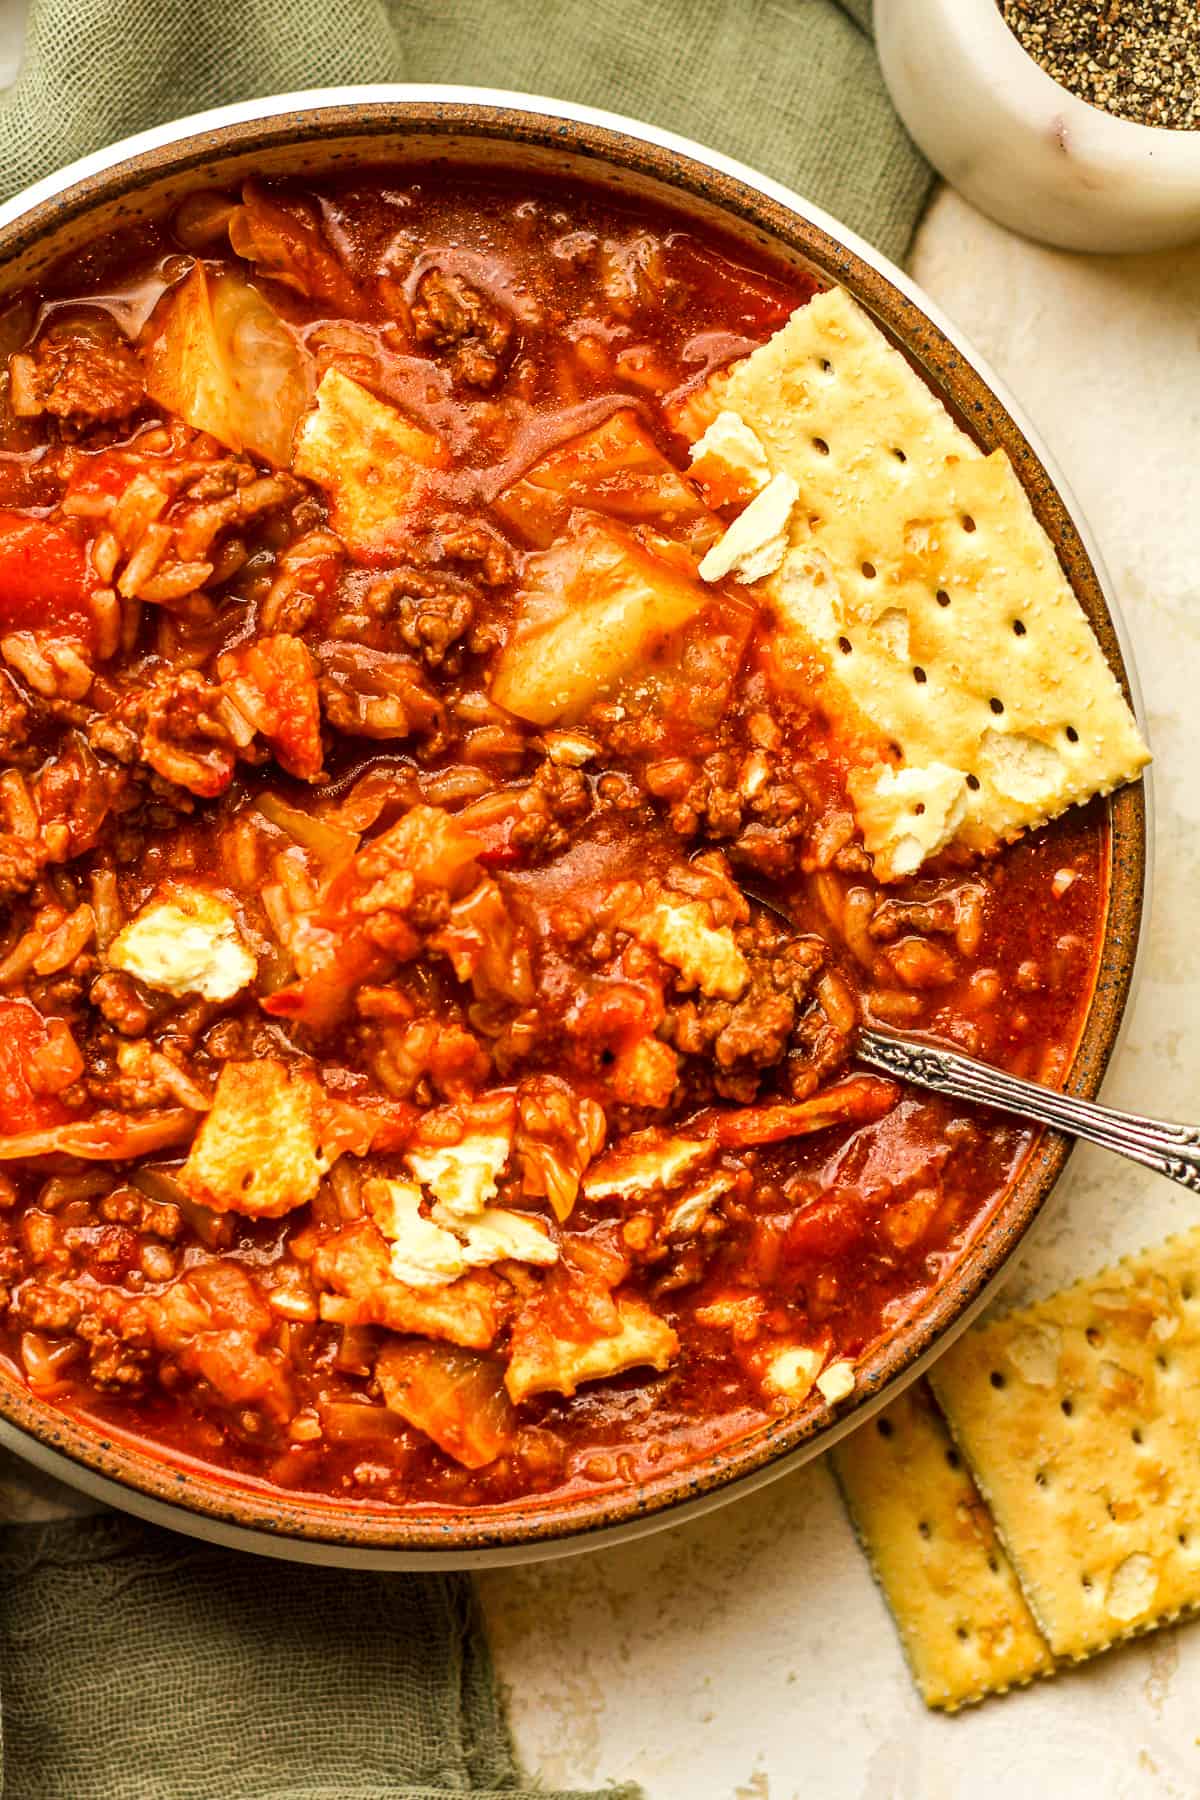 A bowl of cabbage soup with ground beef and crackers.